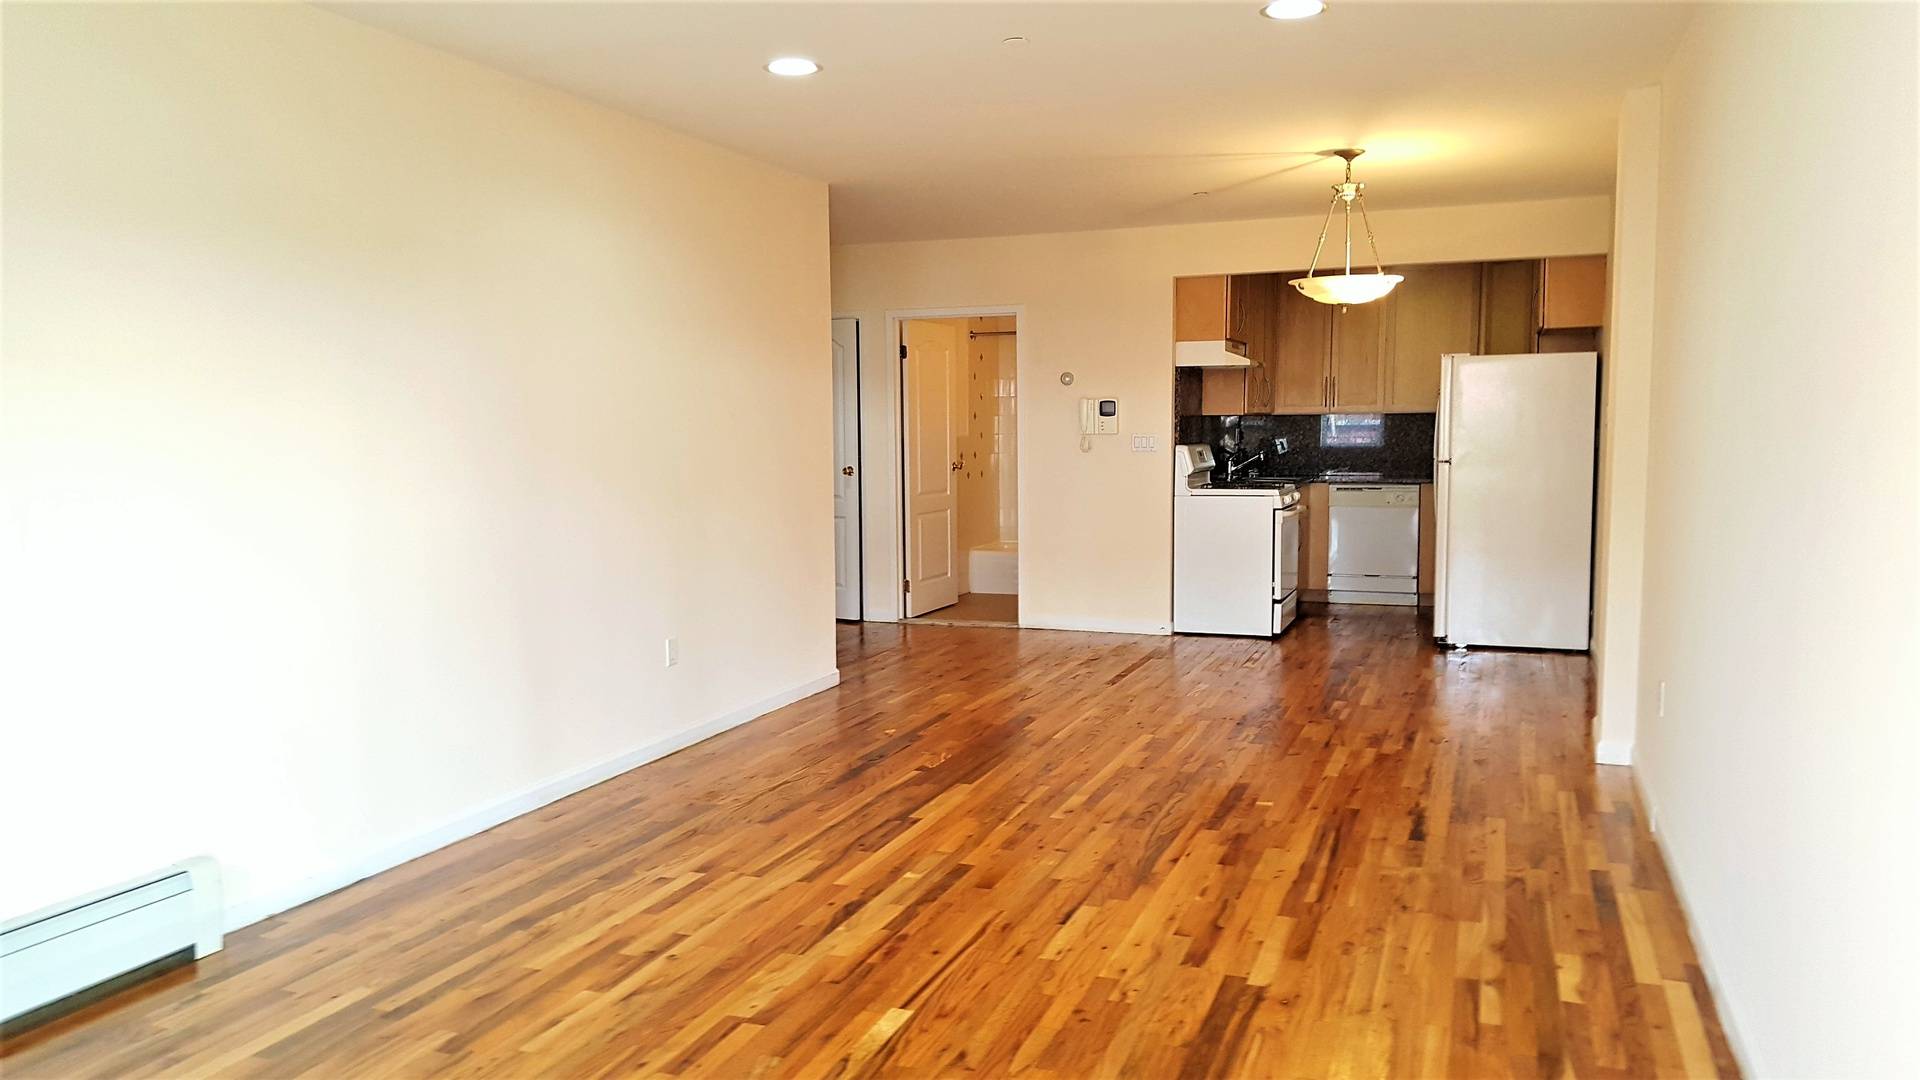 **NO FEE**  SIZE MATTERS!  MASSIVE 2BR IN A MODERN ELEVATOR BUILDING.